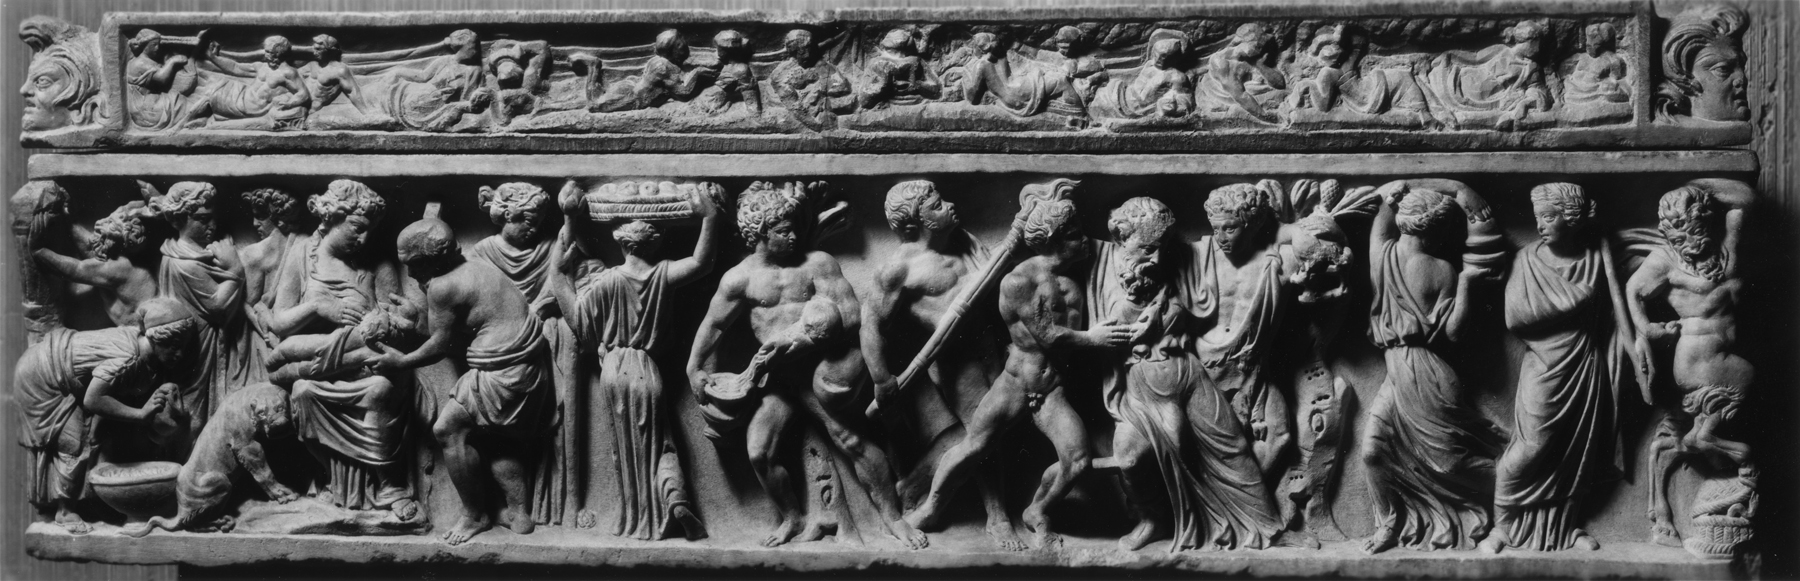 Image for Sarcophagus Depicting the Birth of Dionysus